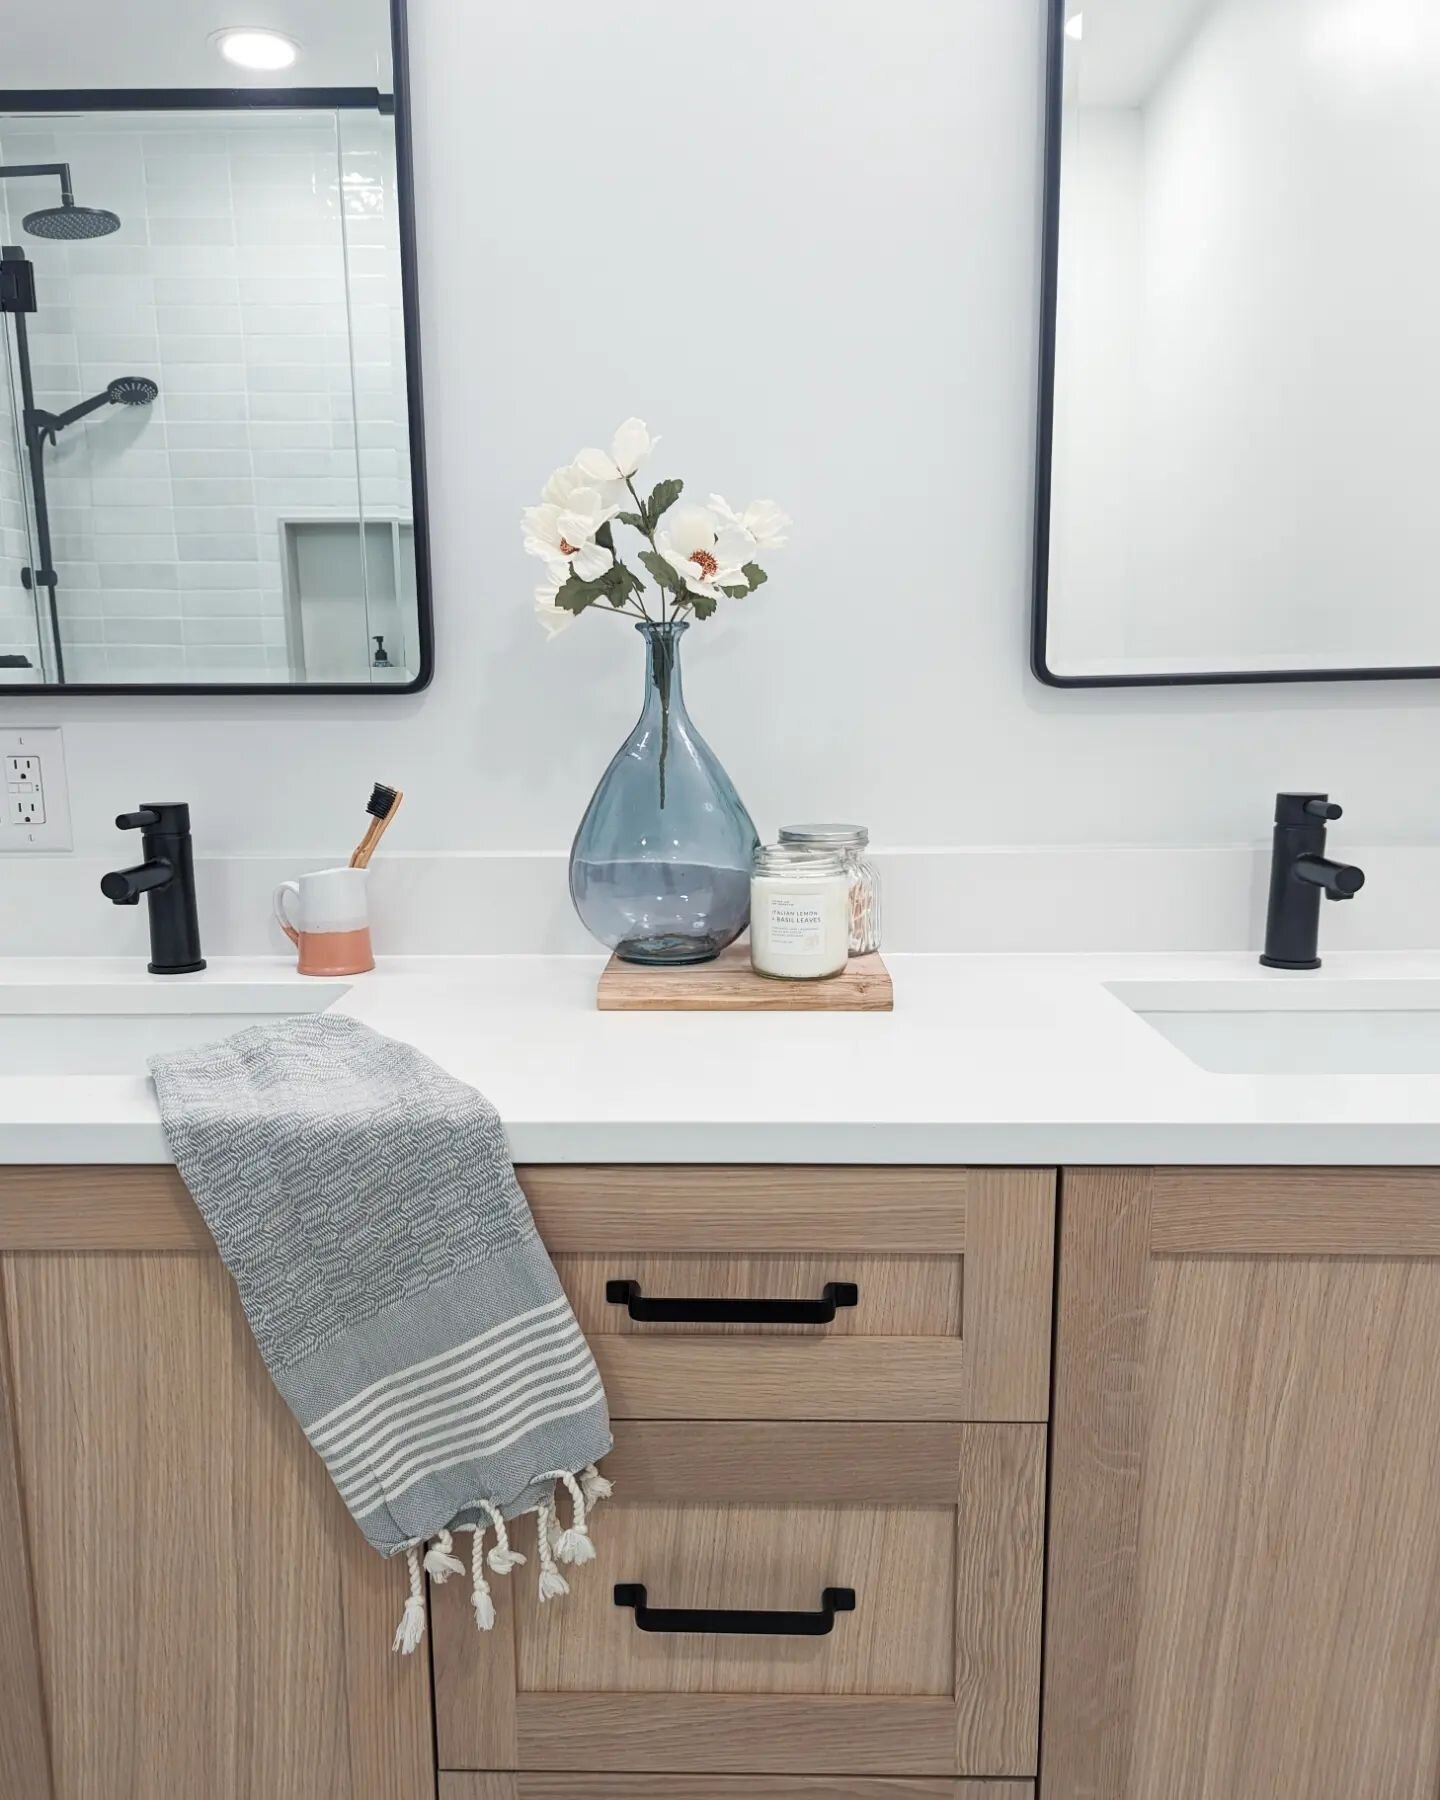 SWIPE FOR BEFORES✨

Well it's a wrap on our Project Ellesmere! 

Walking into this space now feels like a breath of fresh air. We borrowed space from a neighbouring closet to make room for this gorgeous double vanity. Then removed the wall and tub fo